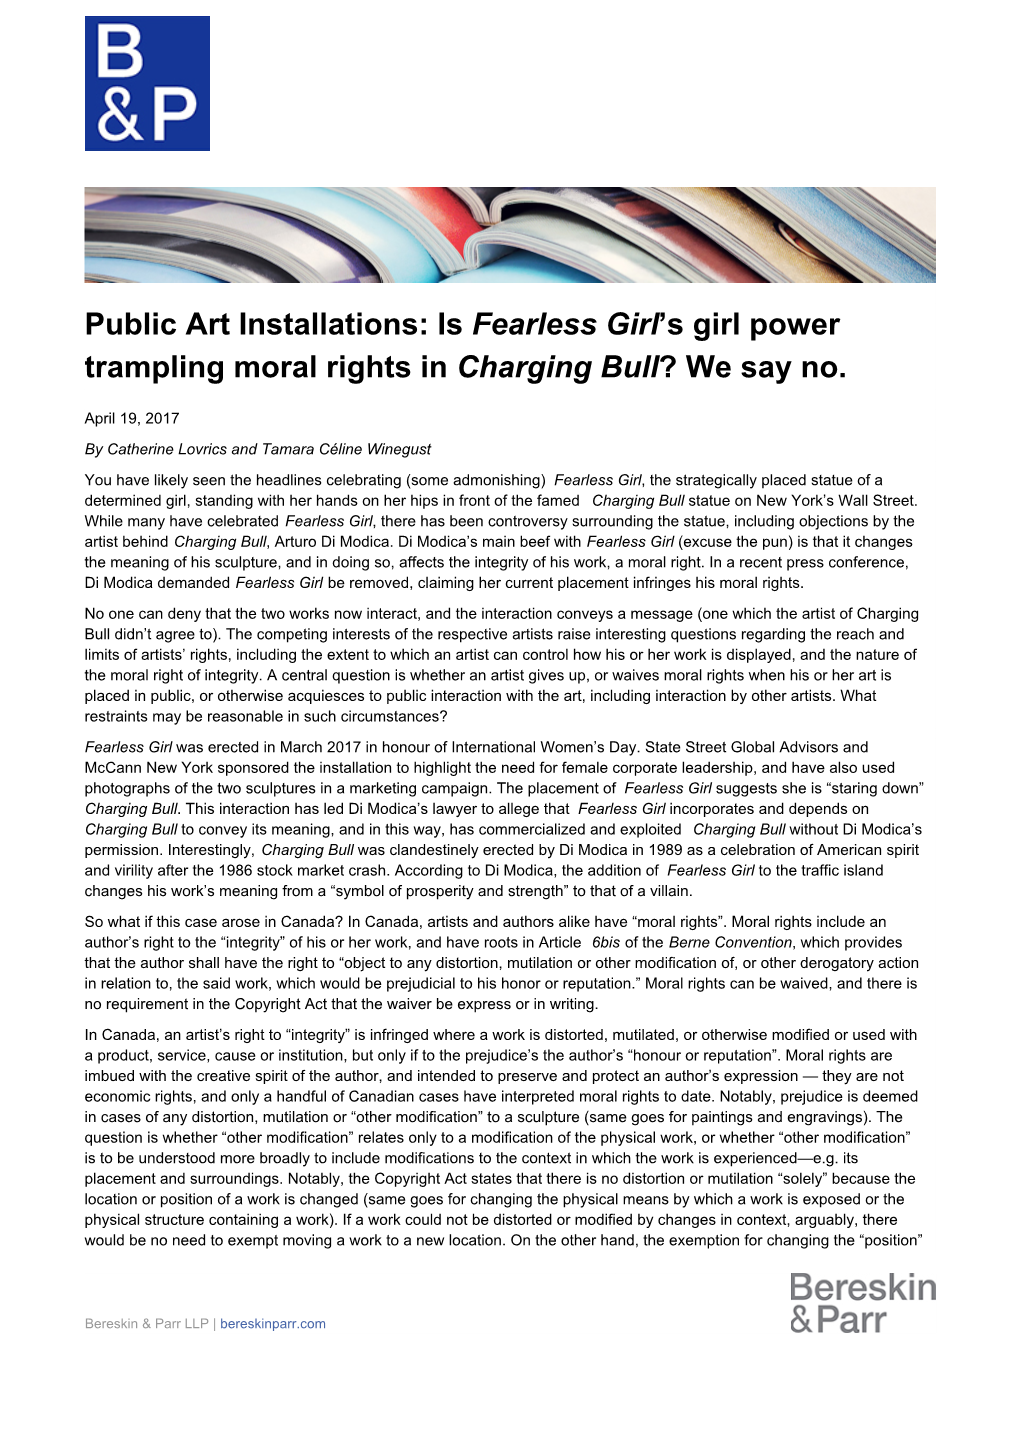 Is Fearless Girl's Girl Power Trampling Moral Rights in Charging Bull?